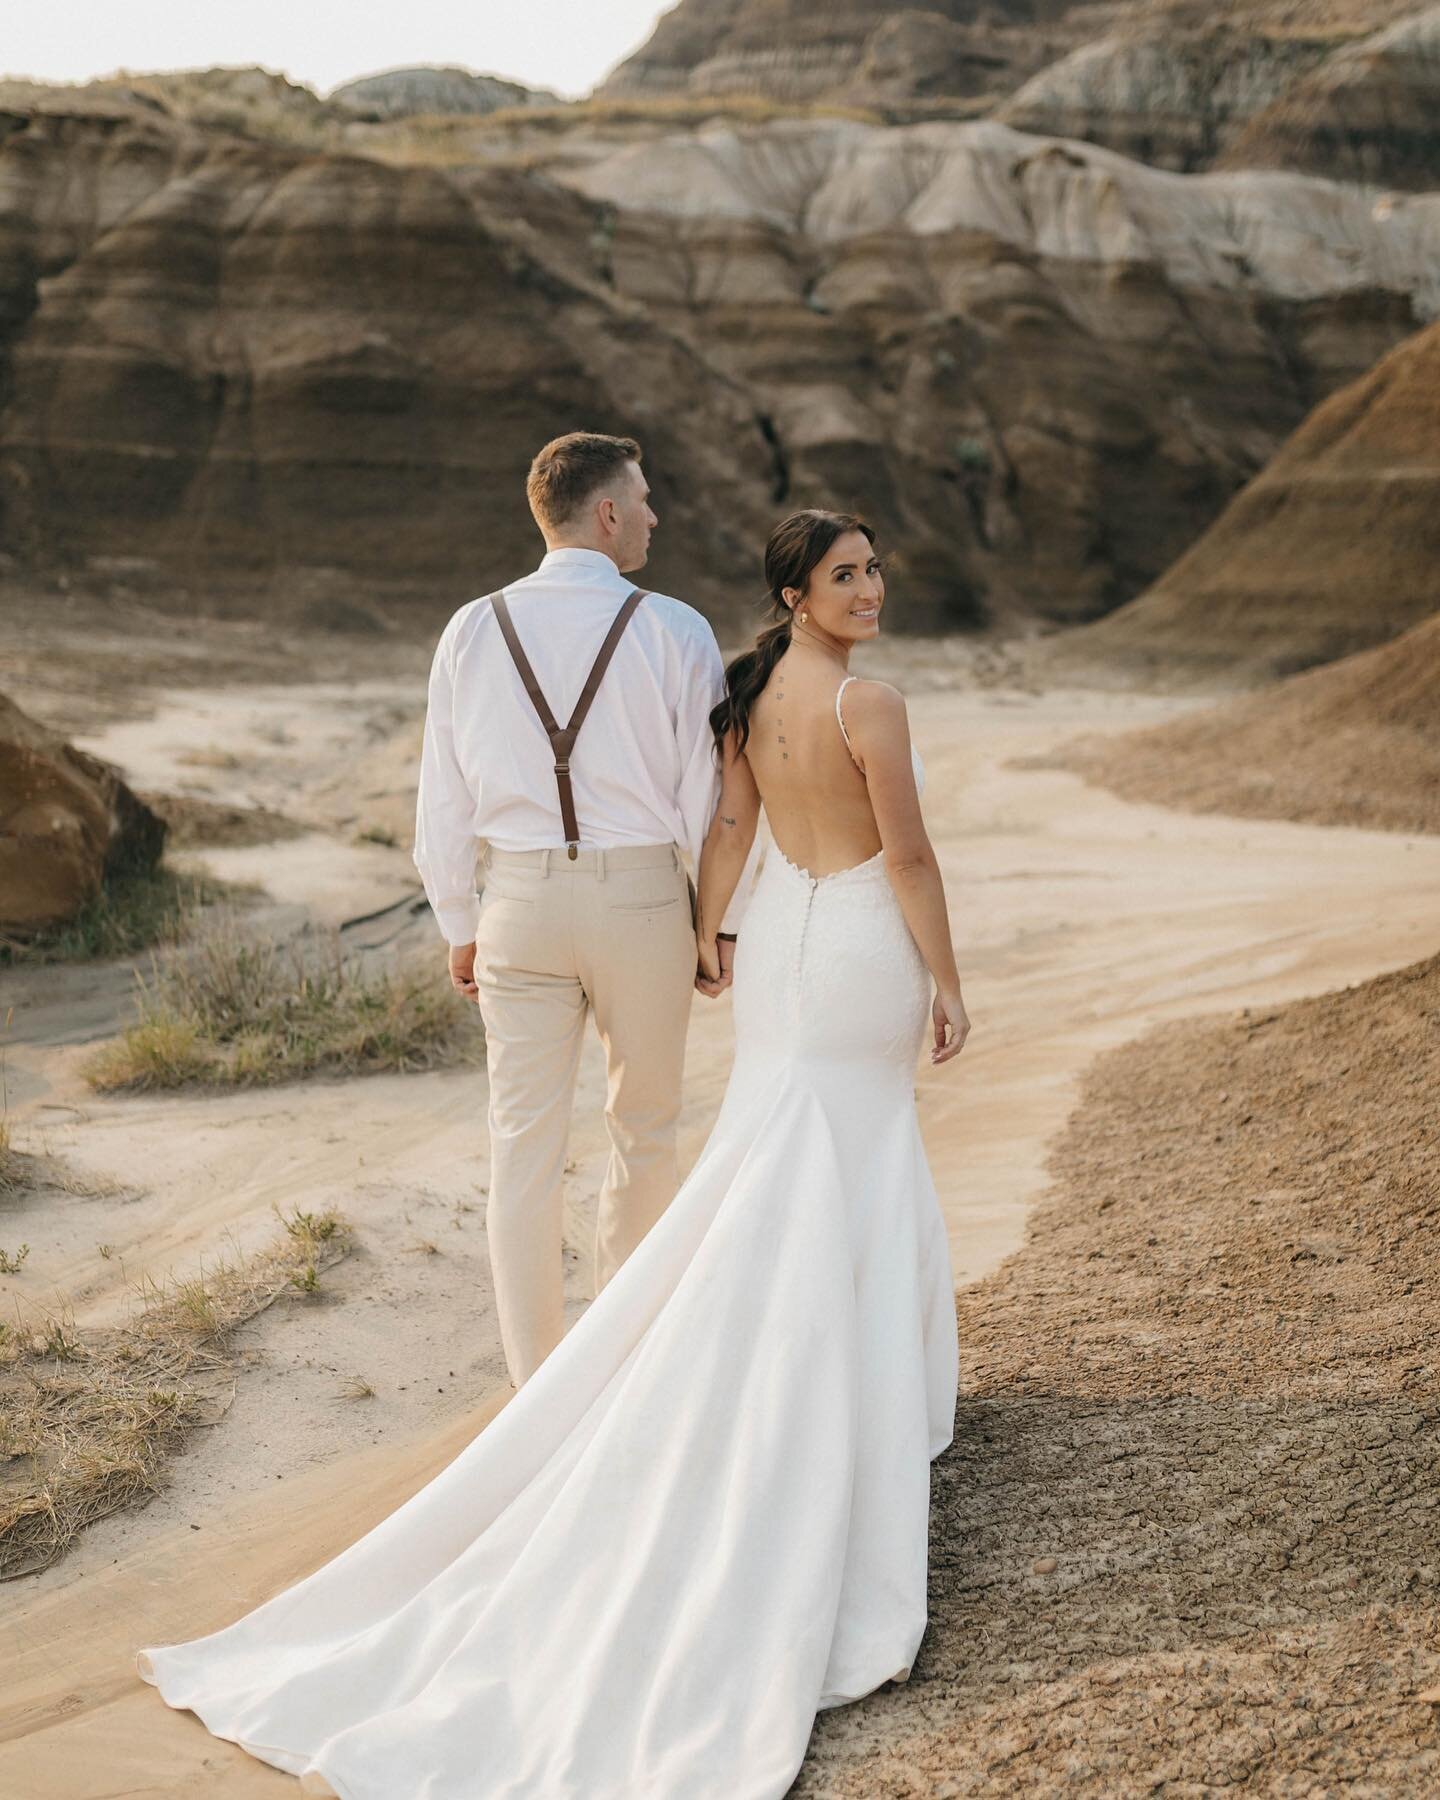 The dreamiest little wedding ceremony in the heart of the badlands. H + K chose an intimate ceremony with their closest family, followed by a sweetheart table picnic. We ran around the sands of the desert during golden hour as they drank champagne fr